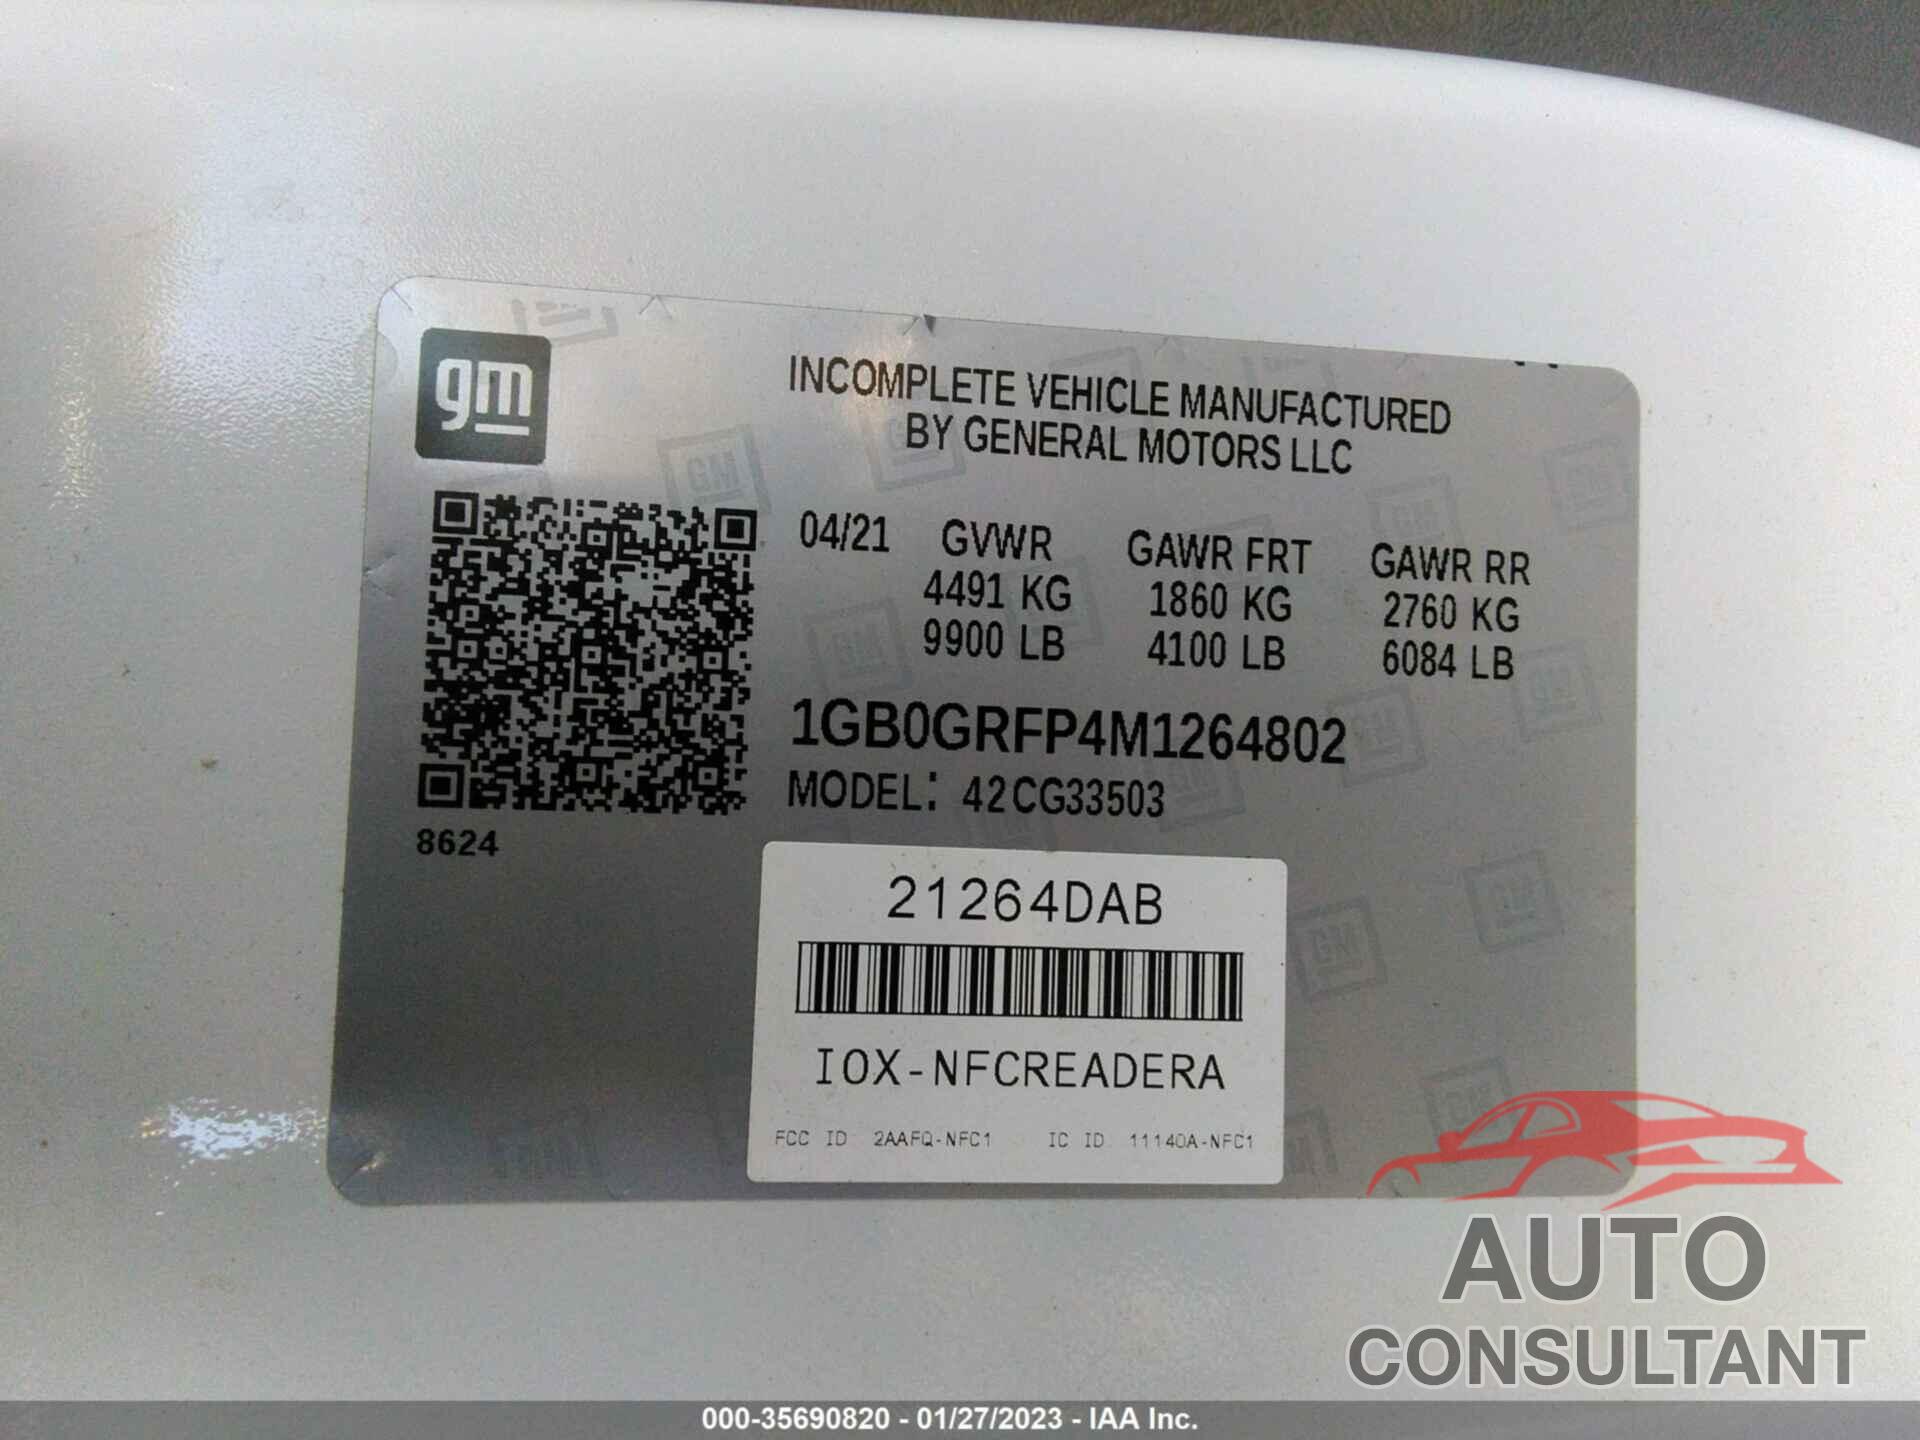 CHEVROLET EXPRESS COMMERCIAL 2021 - 1GB0GRFP4M1264802